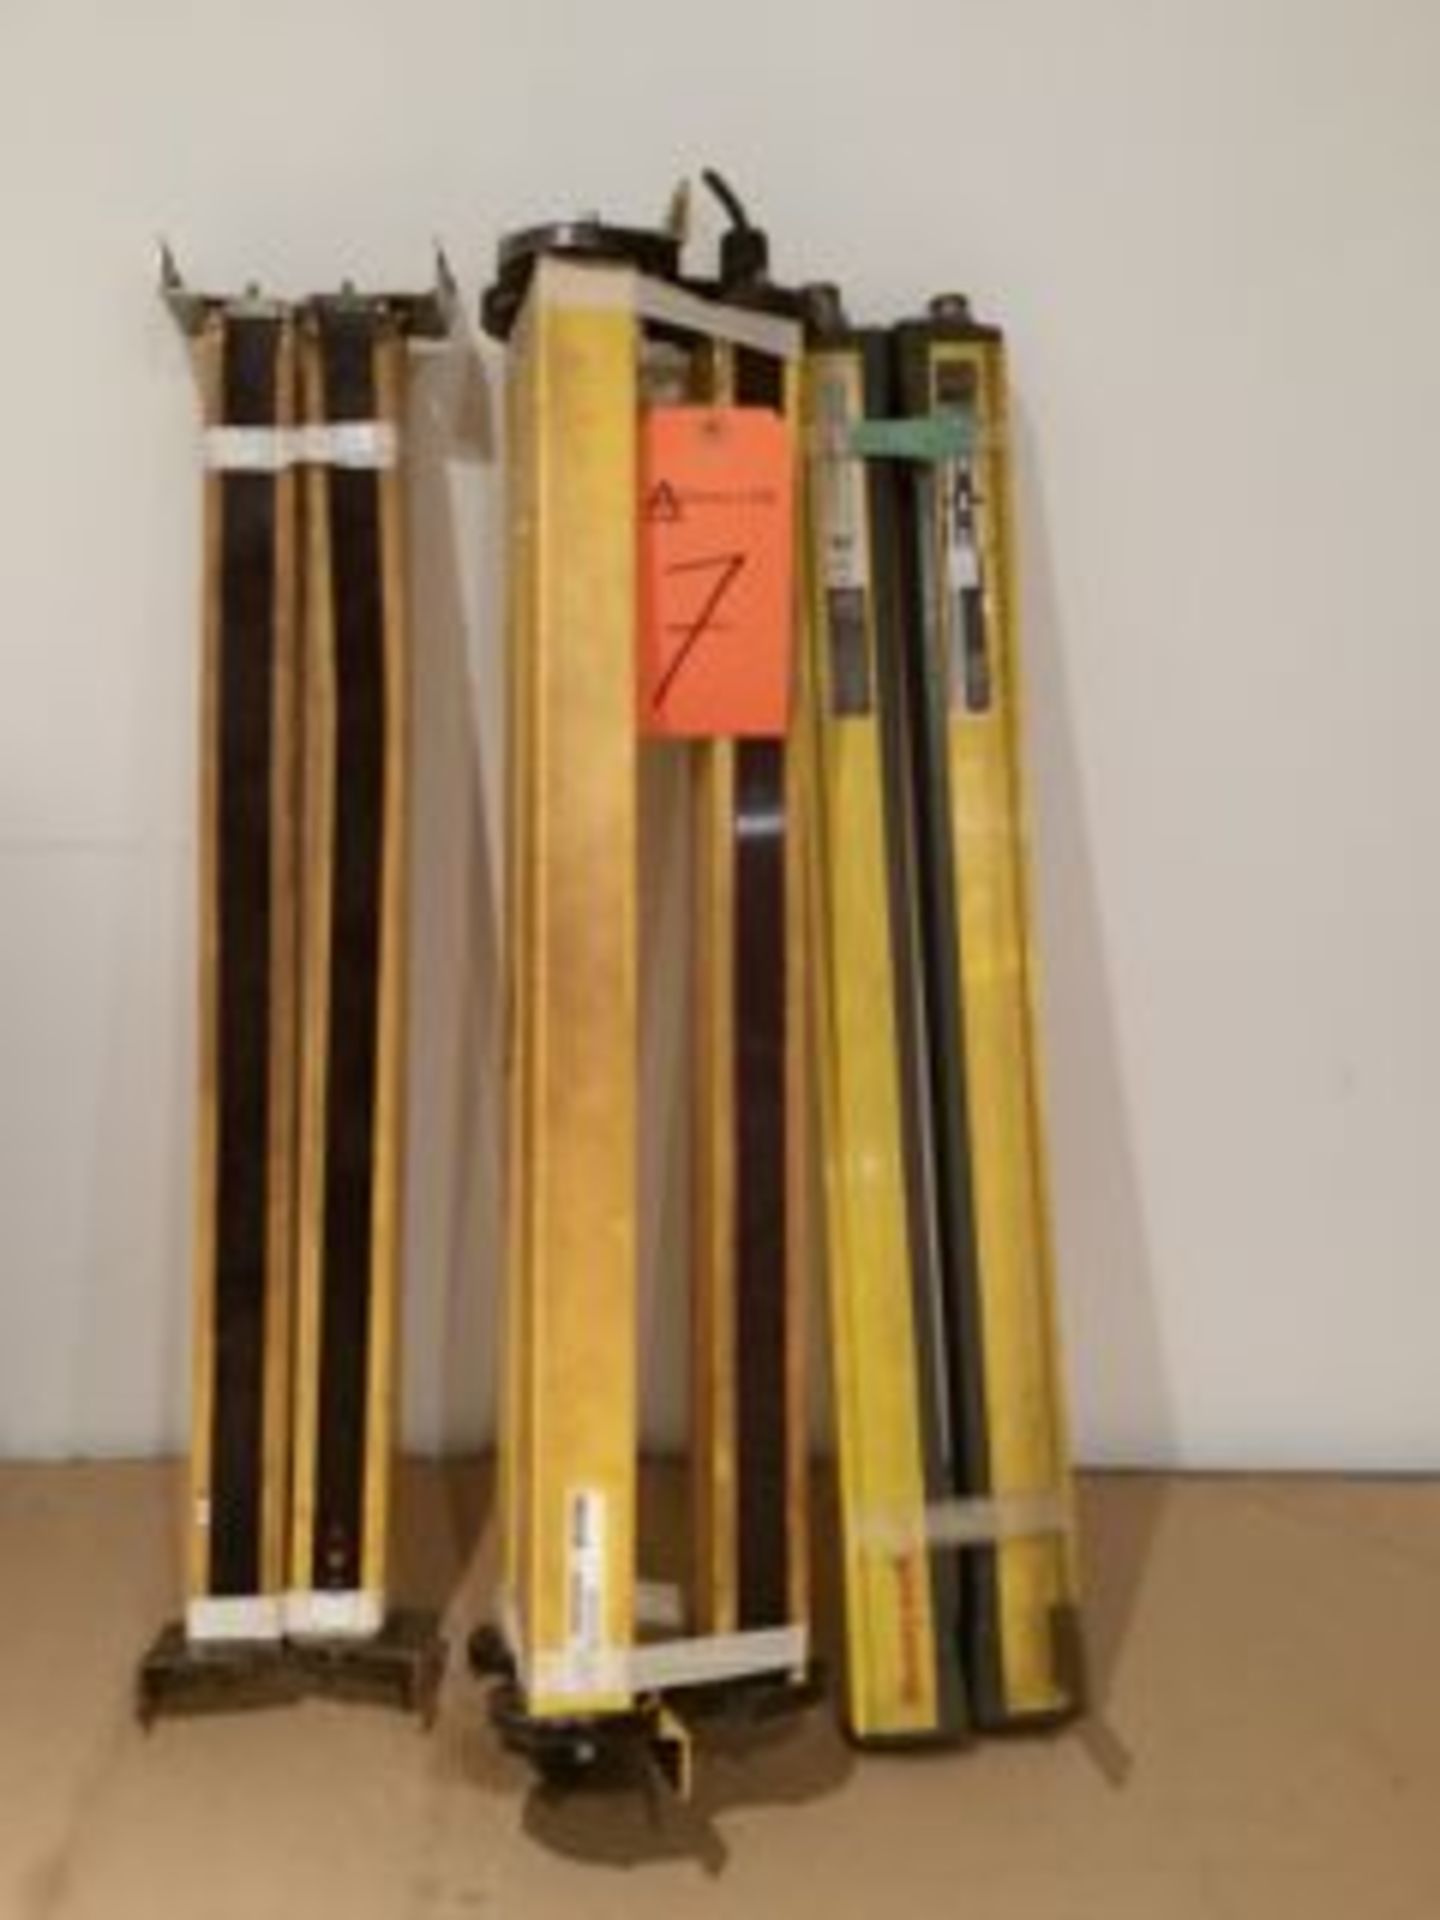 3 sets of Honeywell safety light curtains. 28" length.